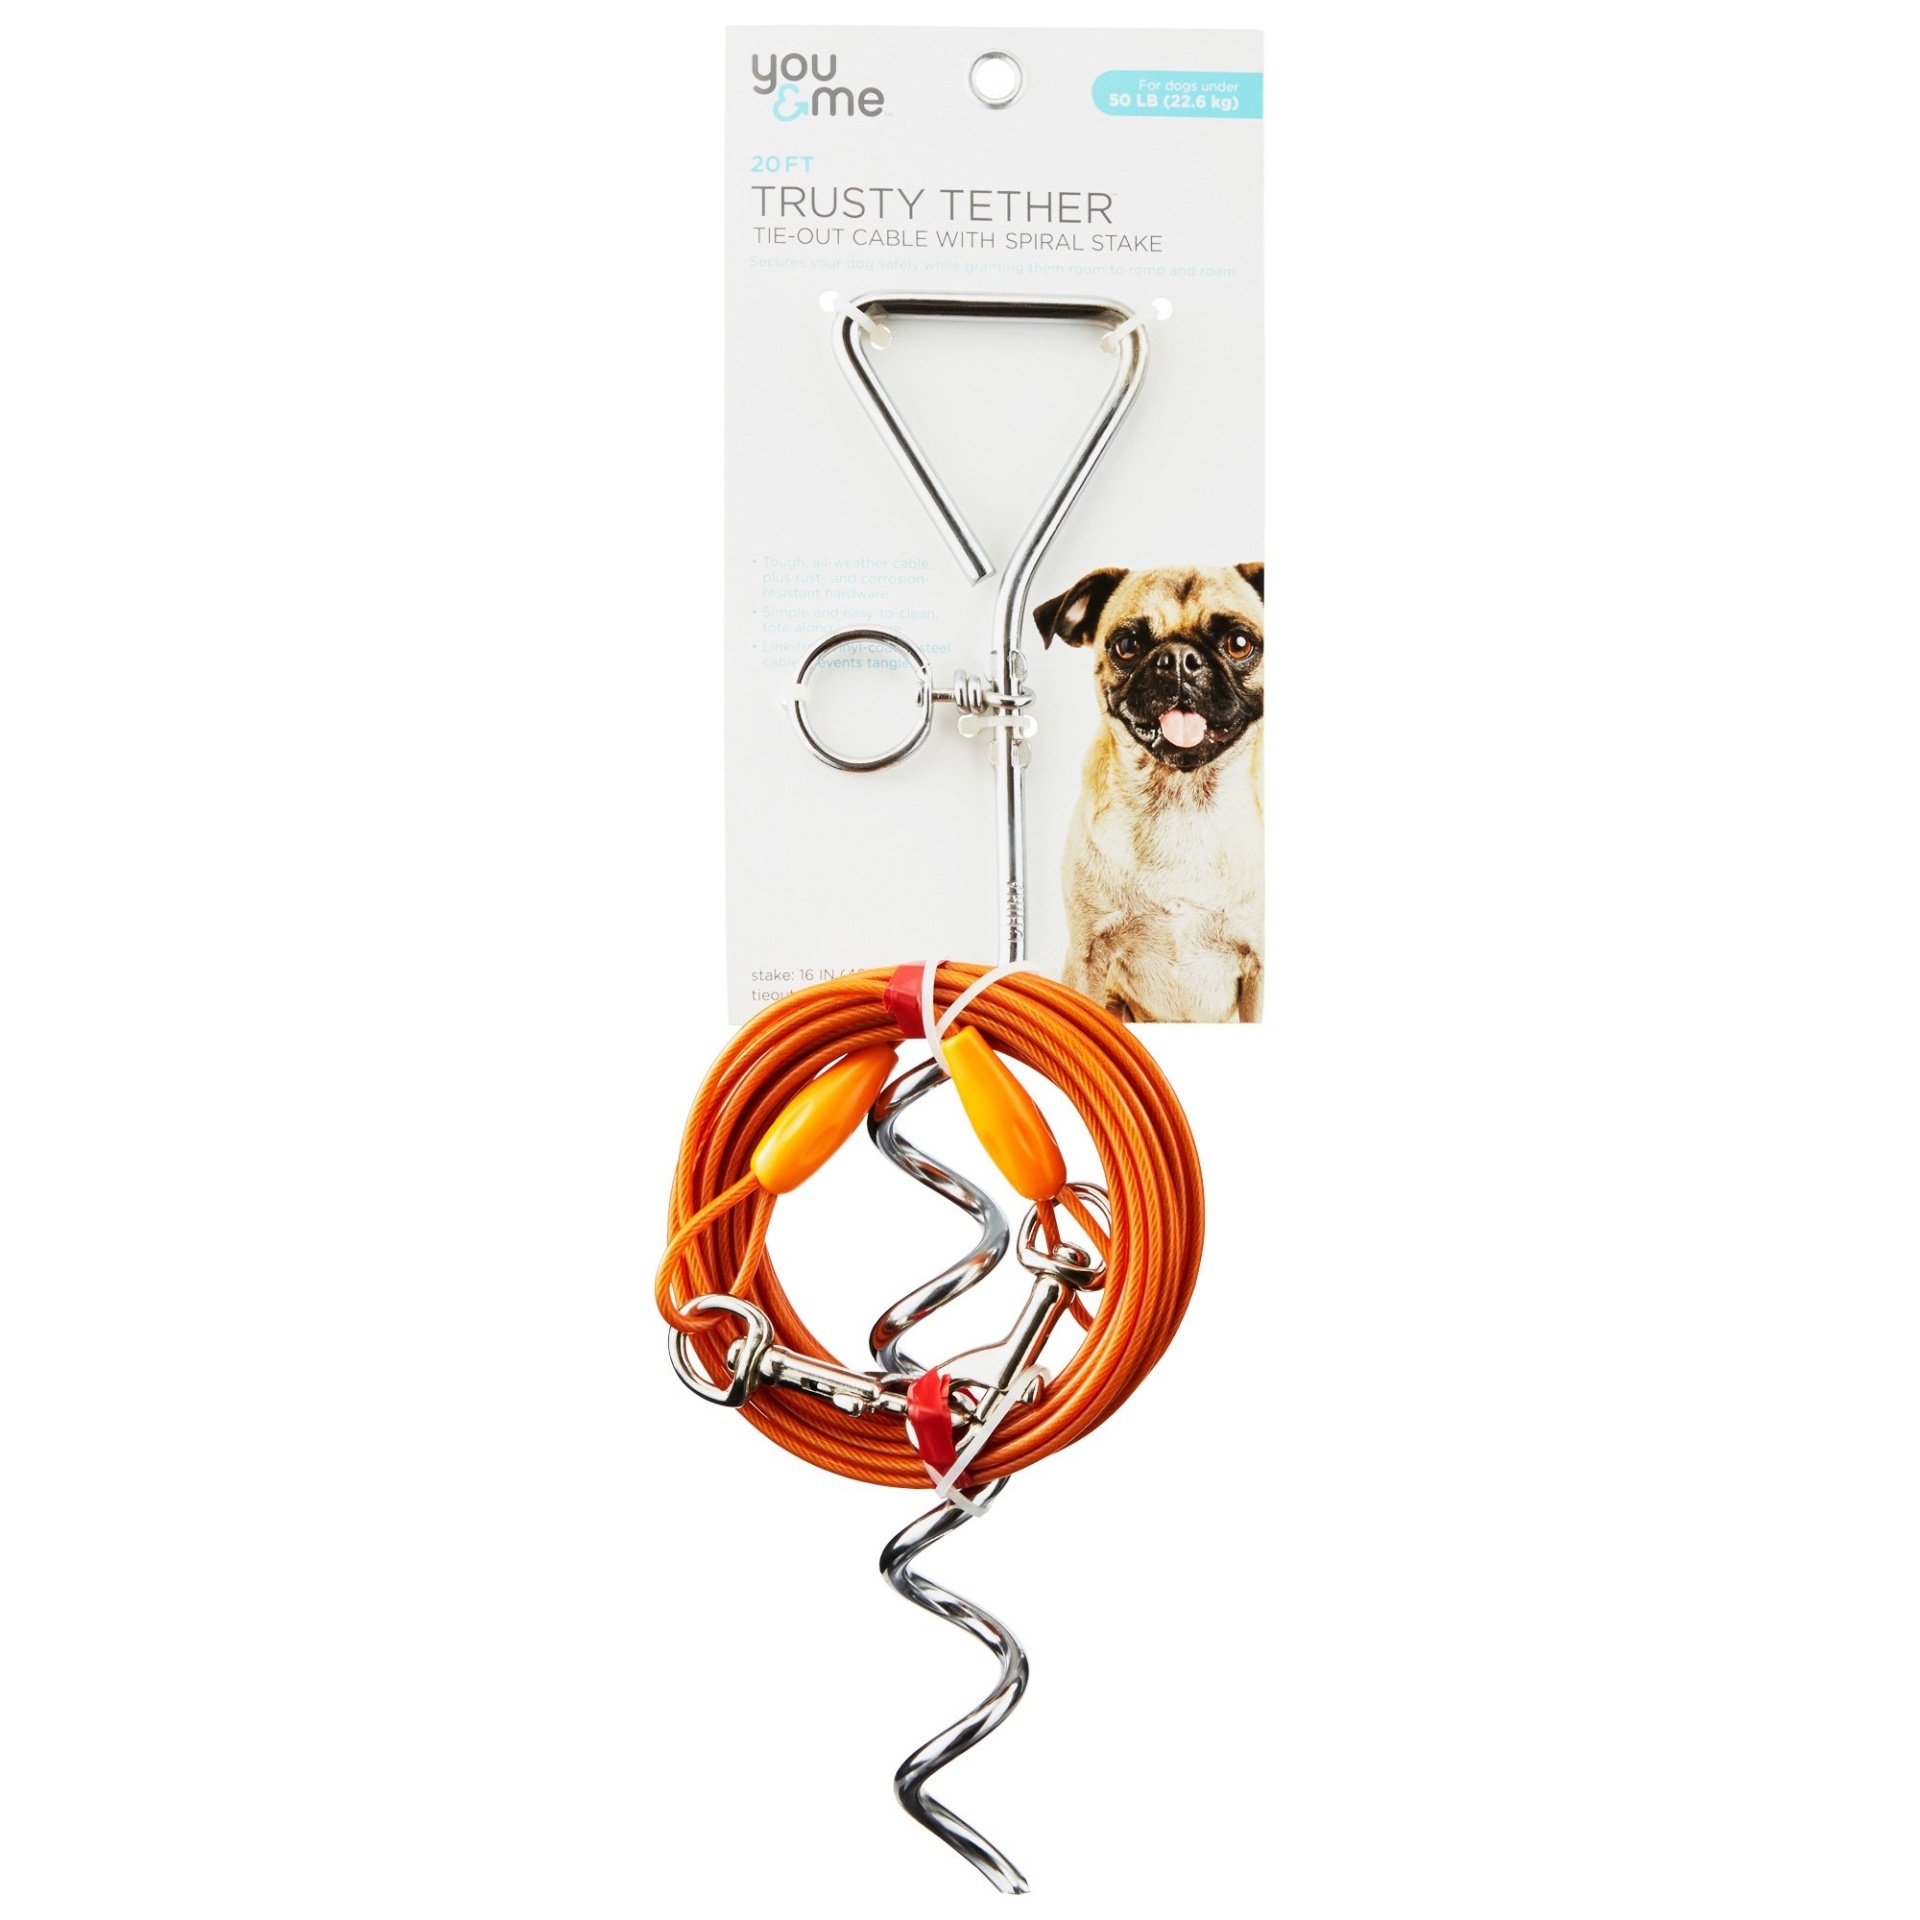 slide 1 of 1, You & Me Trusty Tether Orange Tie-Out Cable with Spiral Stake, MED